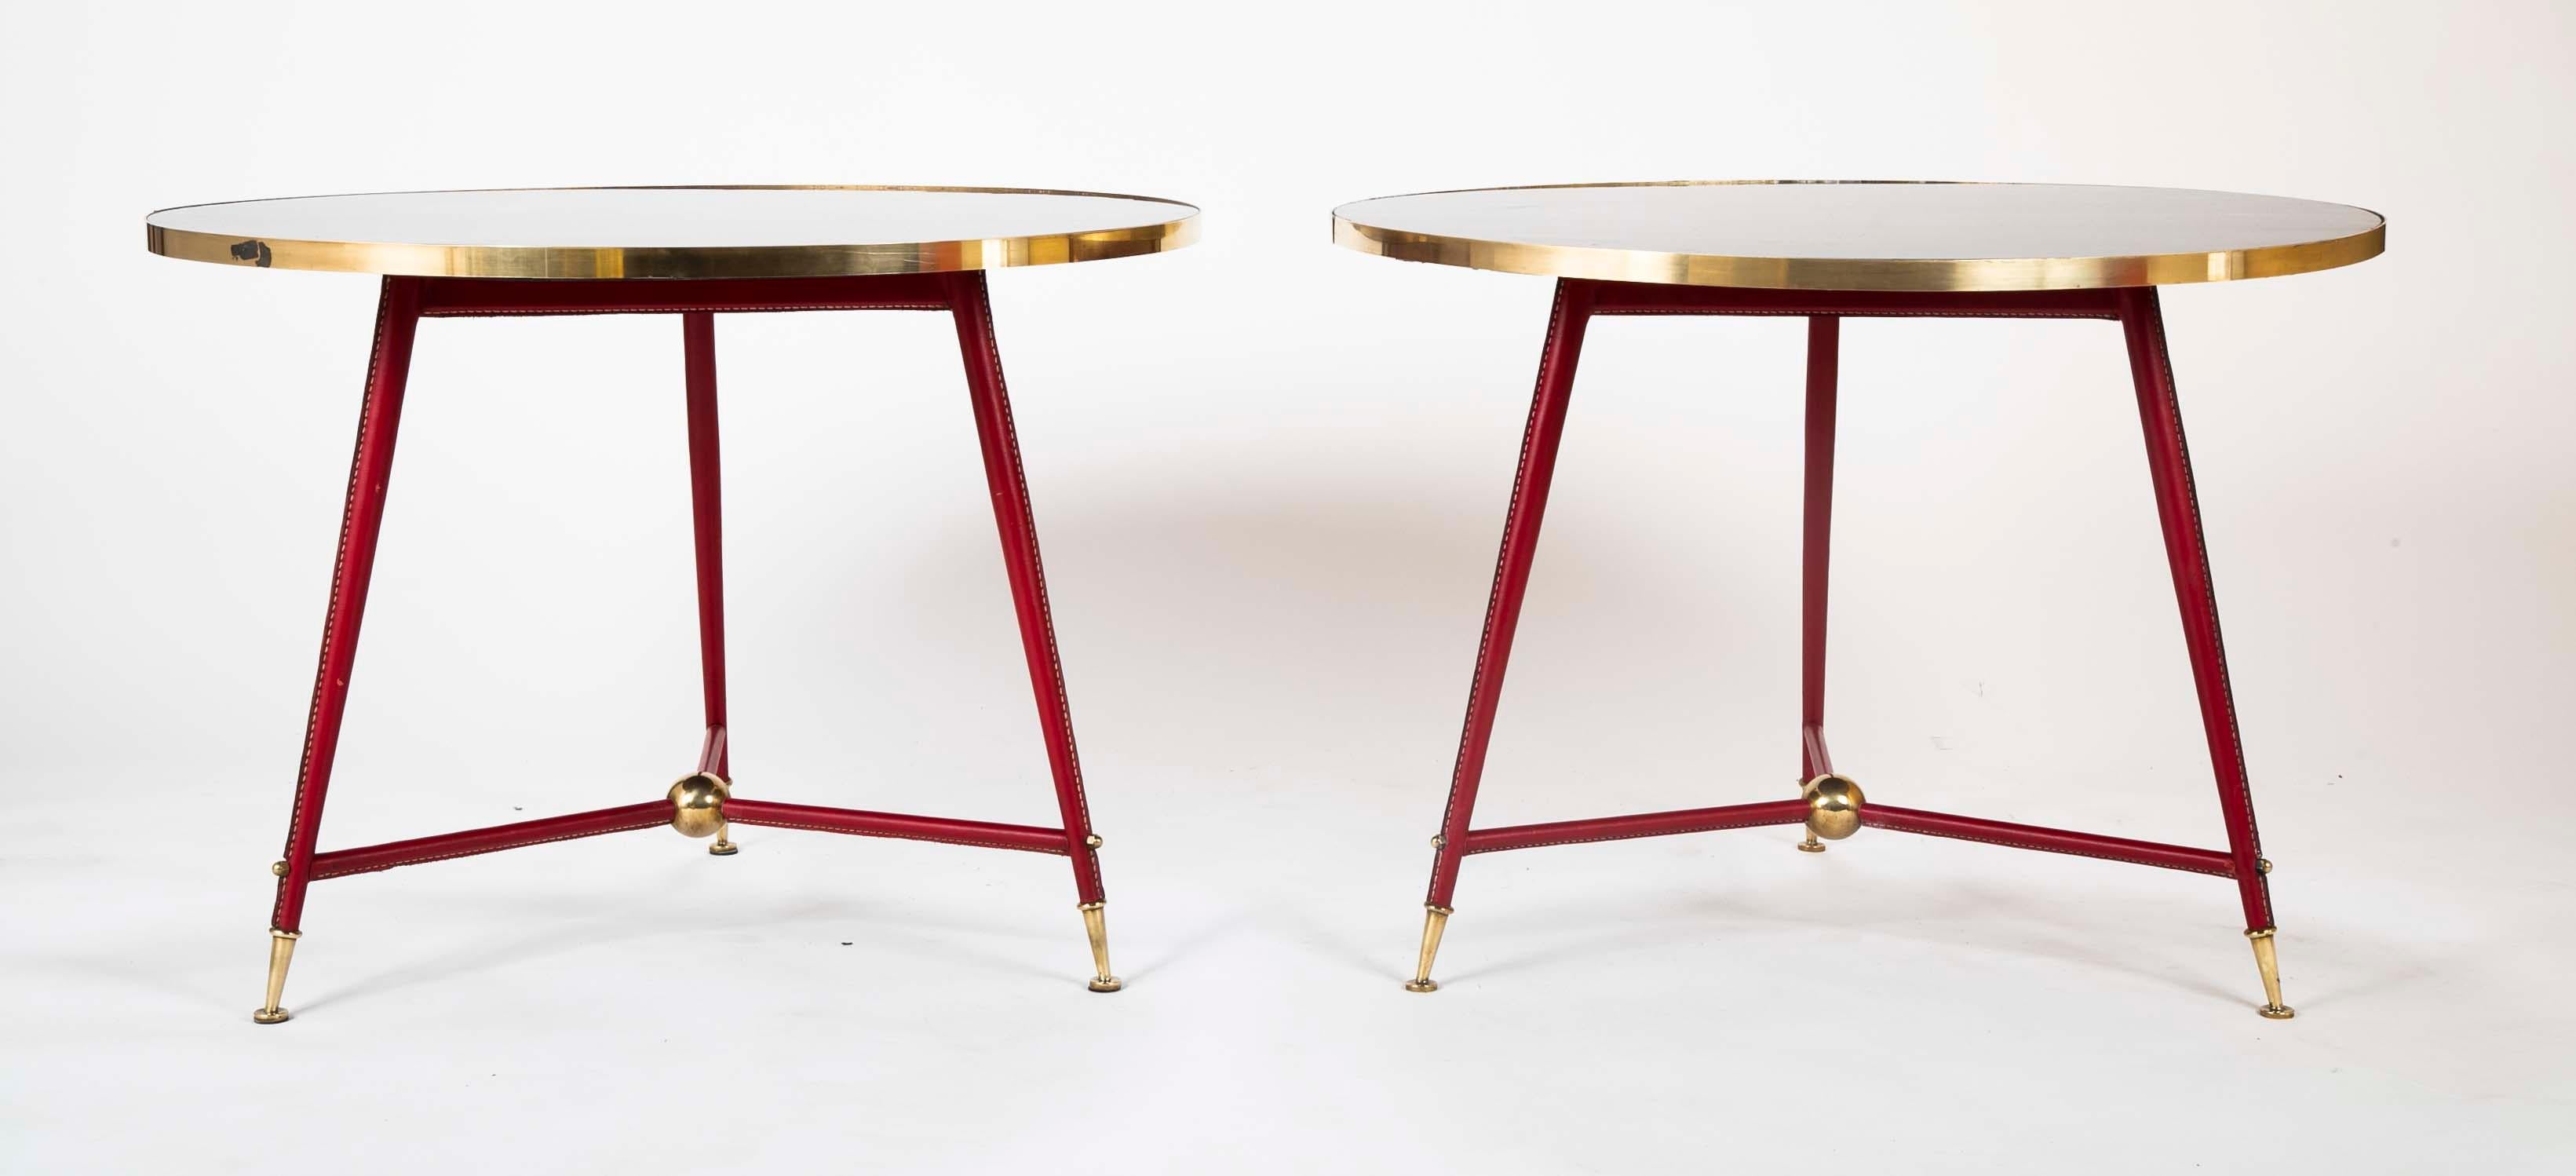 A beautiful pair of Jules Leleu side tables with black lacquered tops. Produced in 1955.